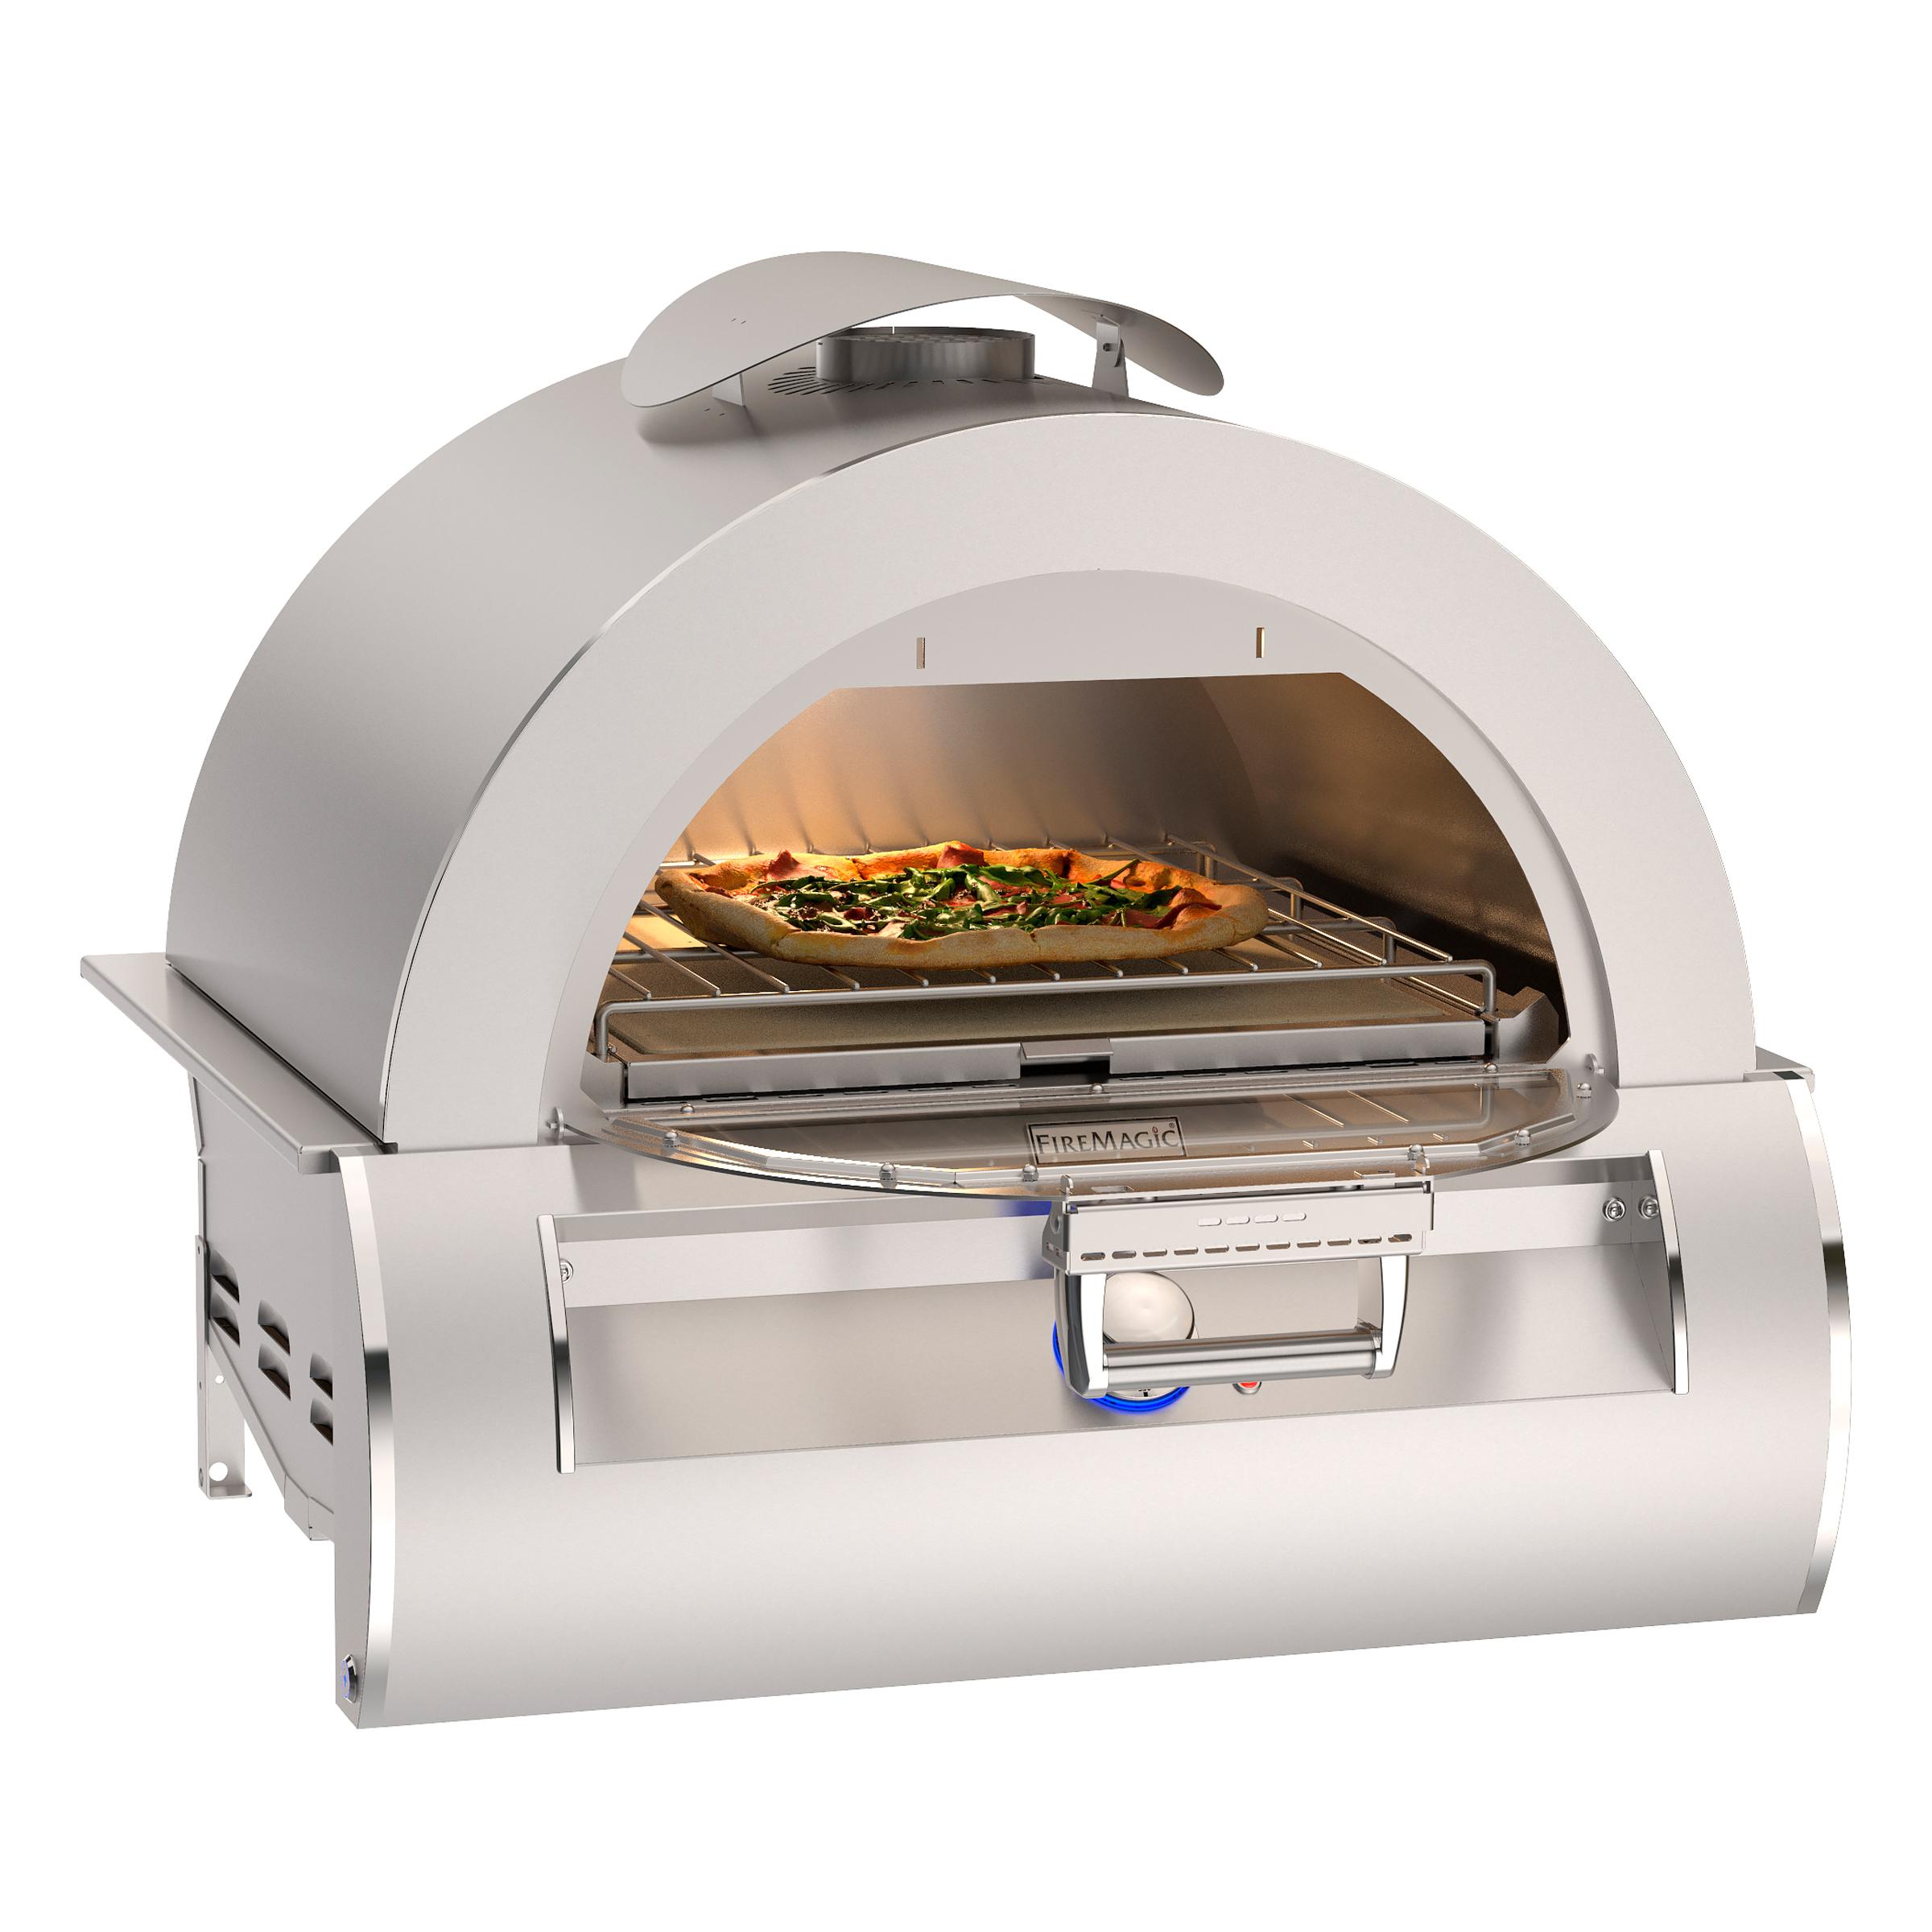 Fire Magic 5600 Built-In Pizza Oven